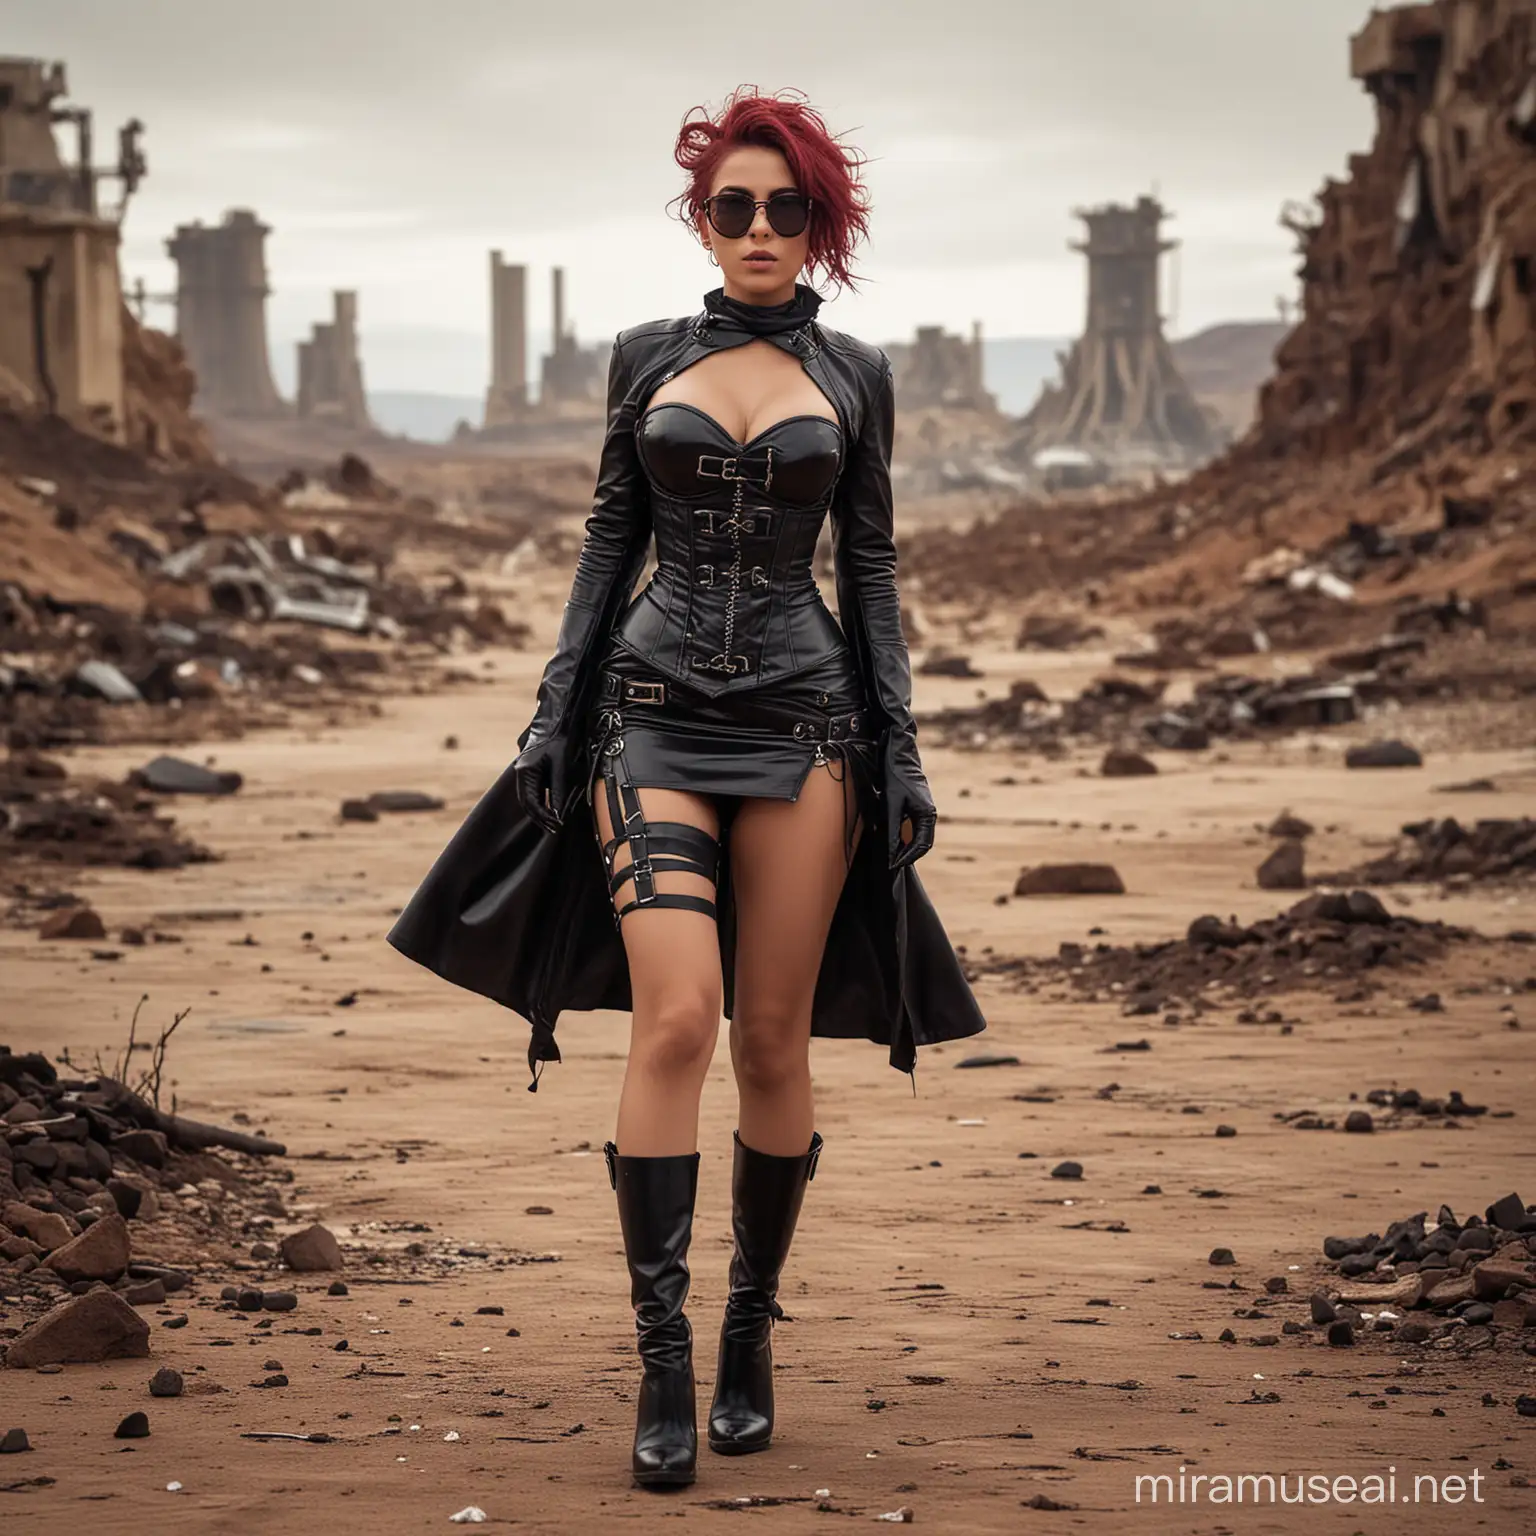 Exotic Woman in Latex Outfit Explores Radioactive Wasteland